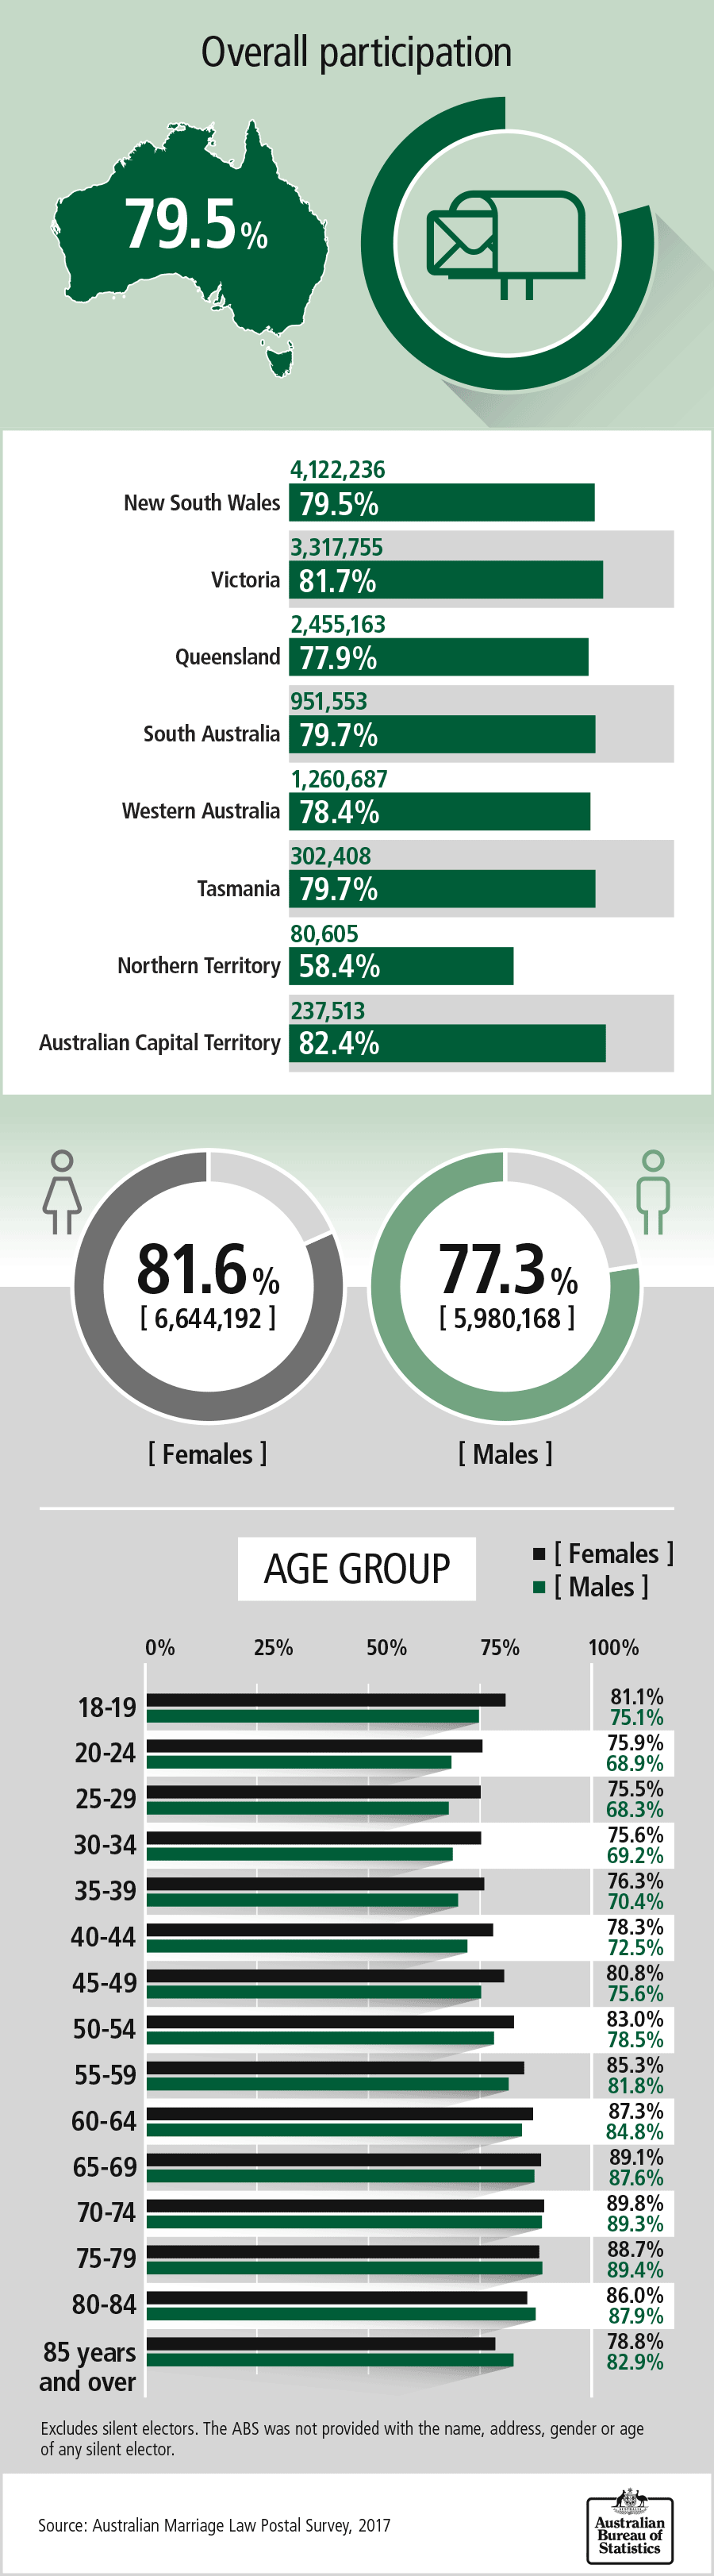 Infographic showing the overall participation rate (79.5%) at the national level and state and territory level, and the participation rate by gender and age group. More details following.